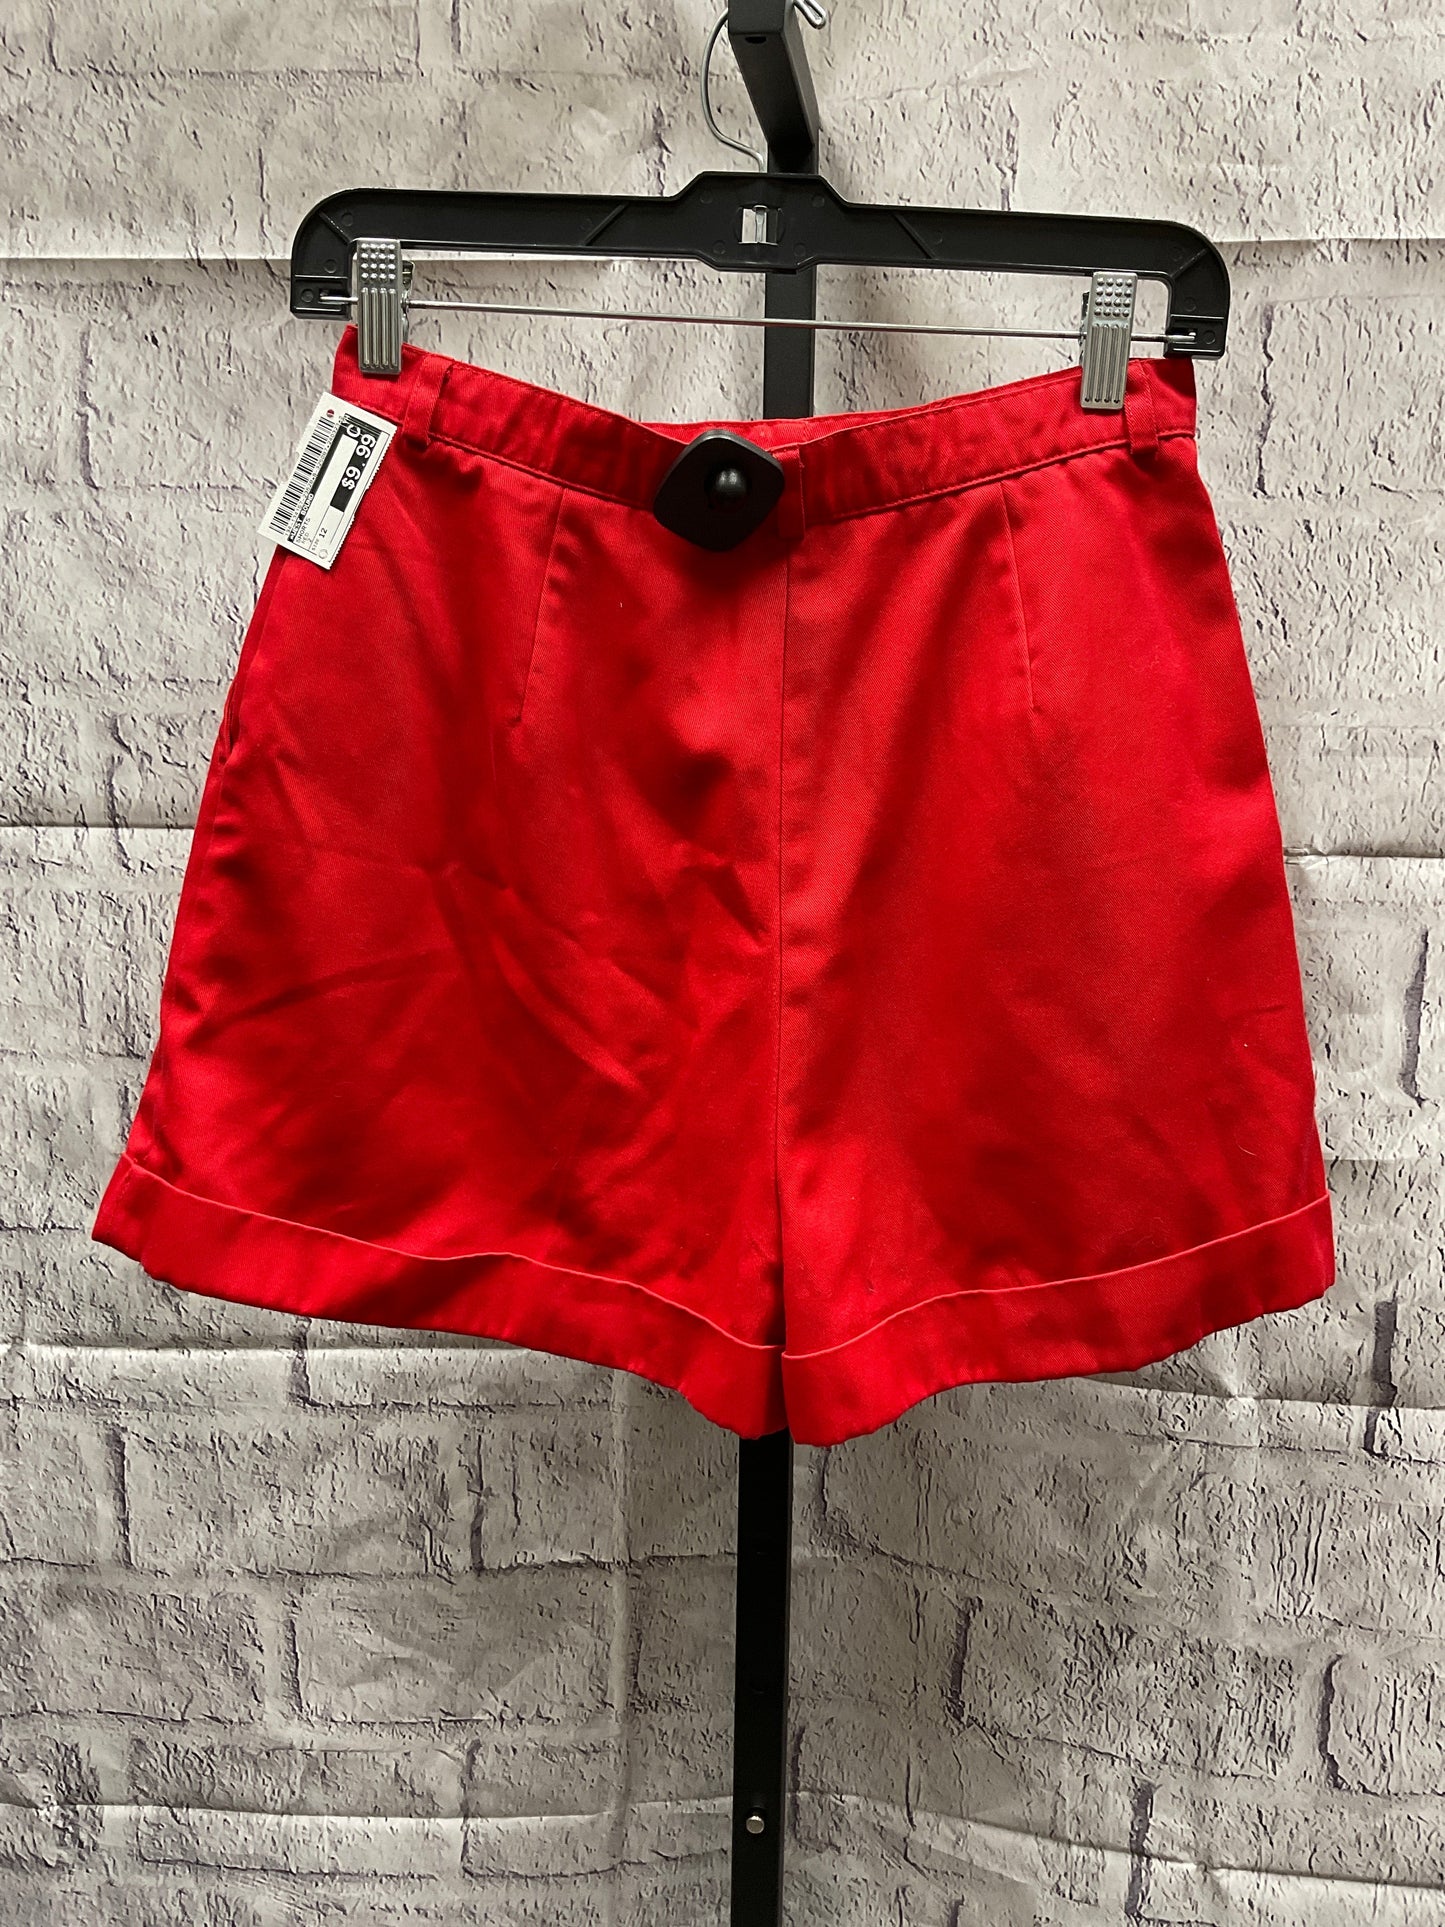 Shorts By West Bound  Size: 12